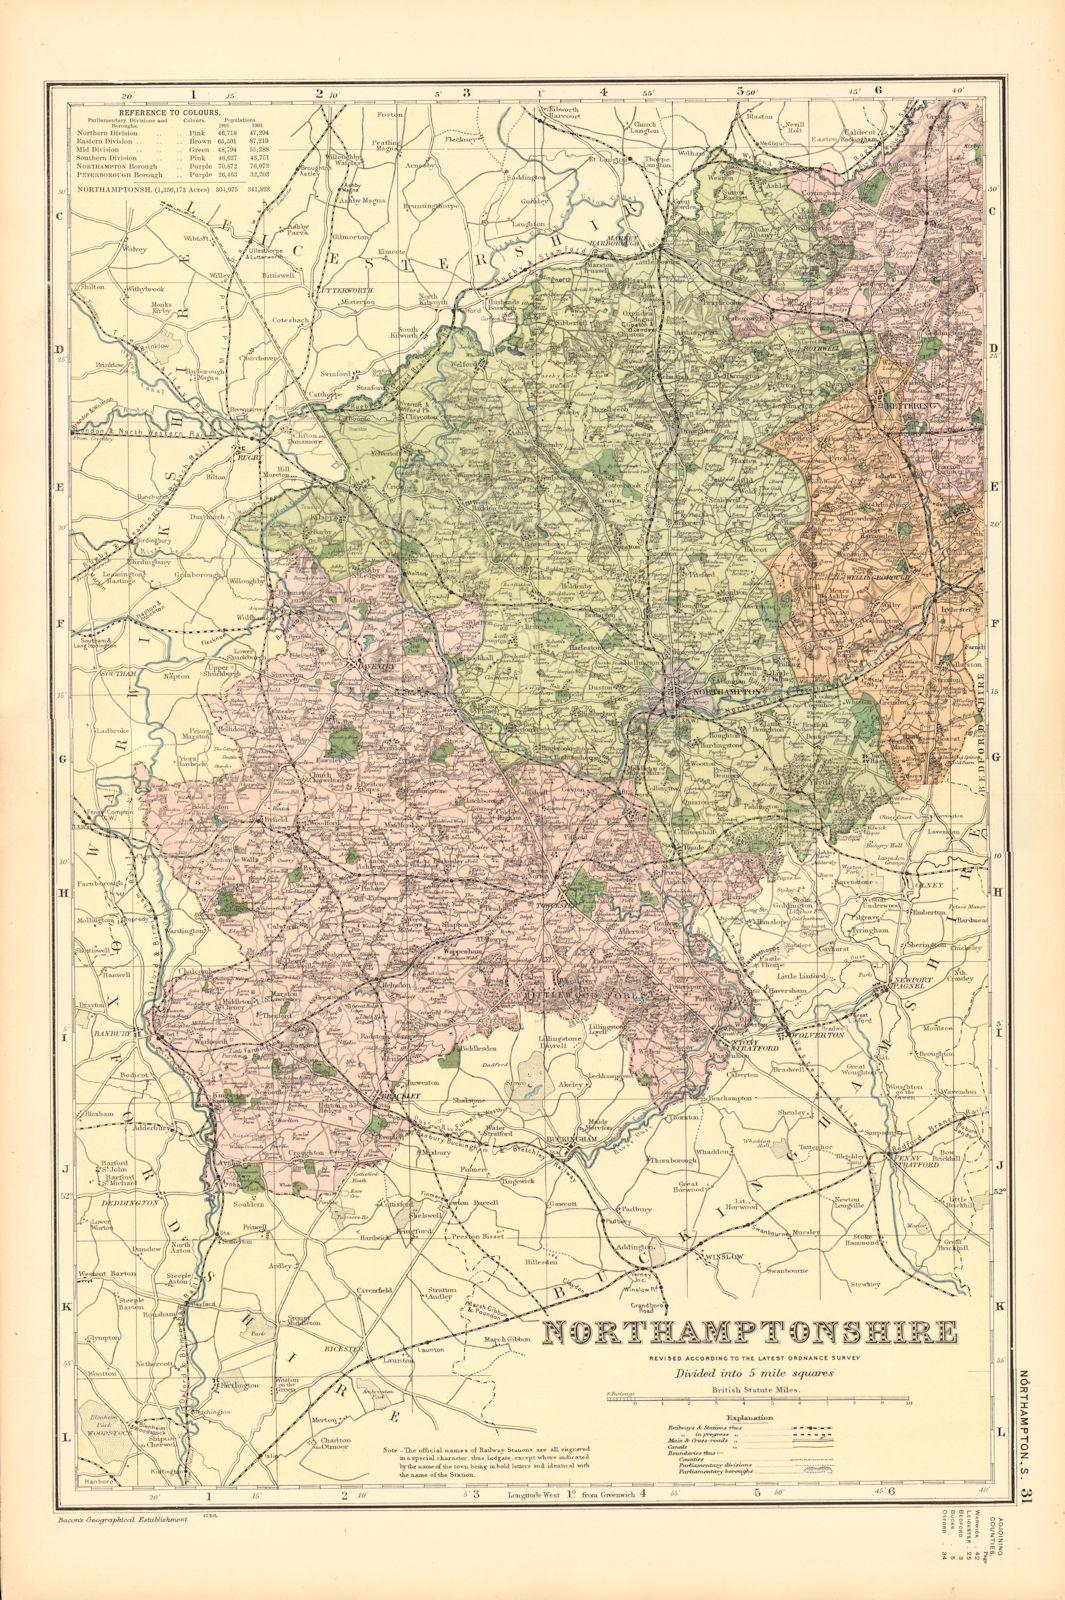 NORTHAMPTONSHIRE (SOUTH). Constituencies, boroughs & parks. BACON 1904 old map